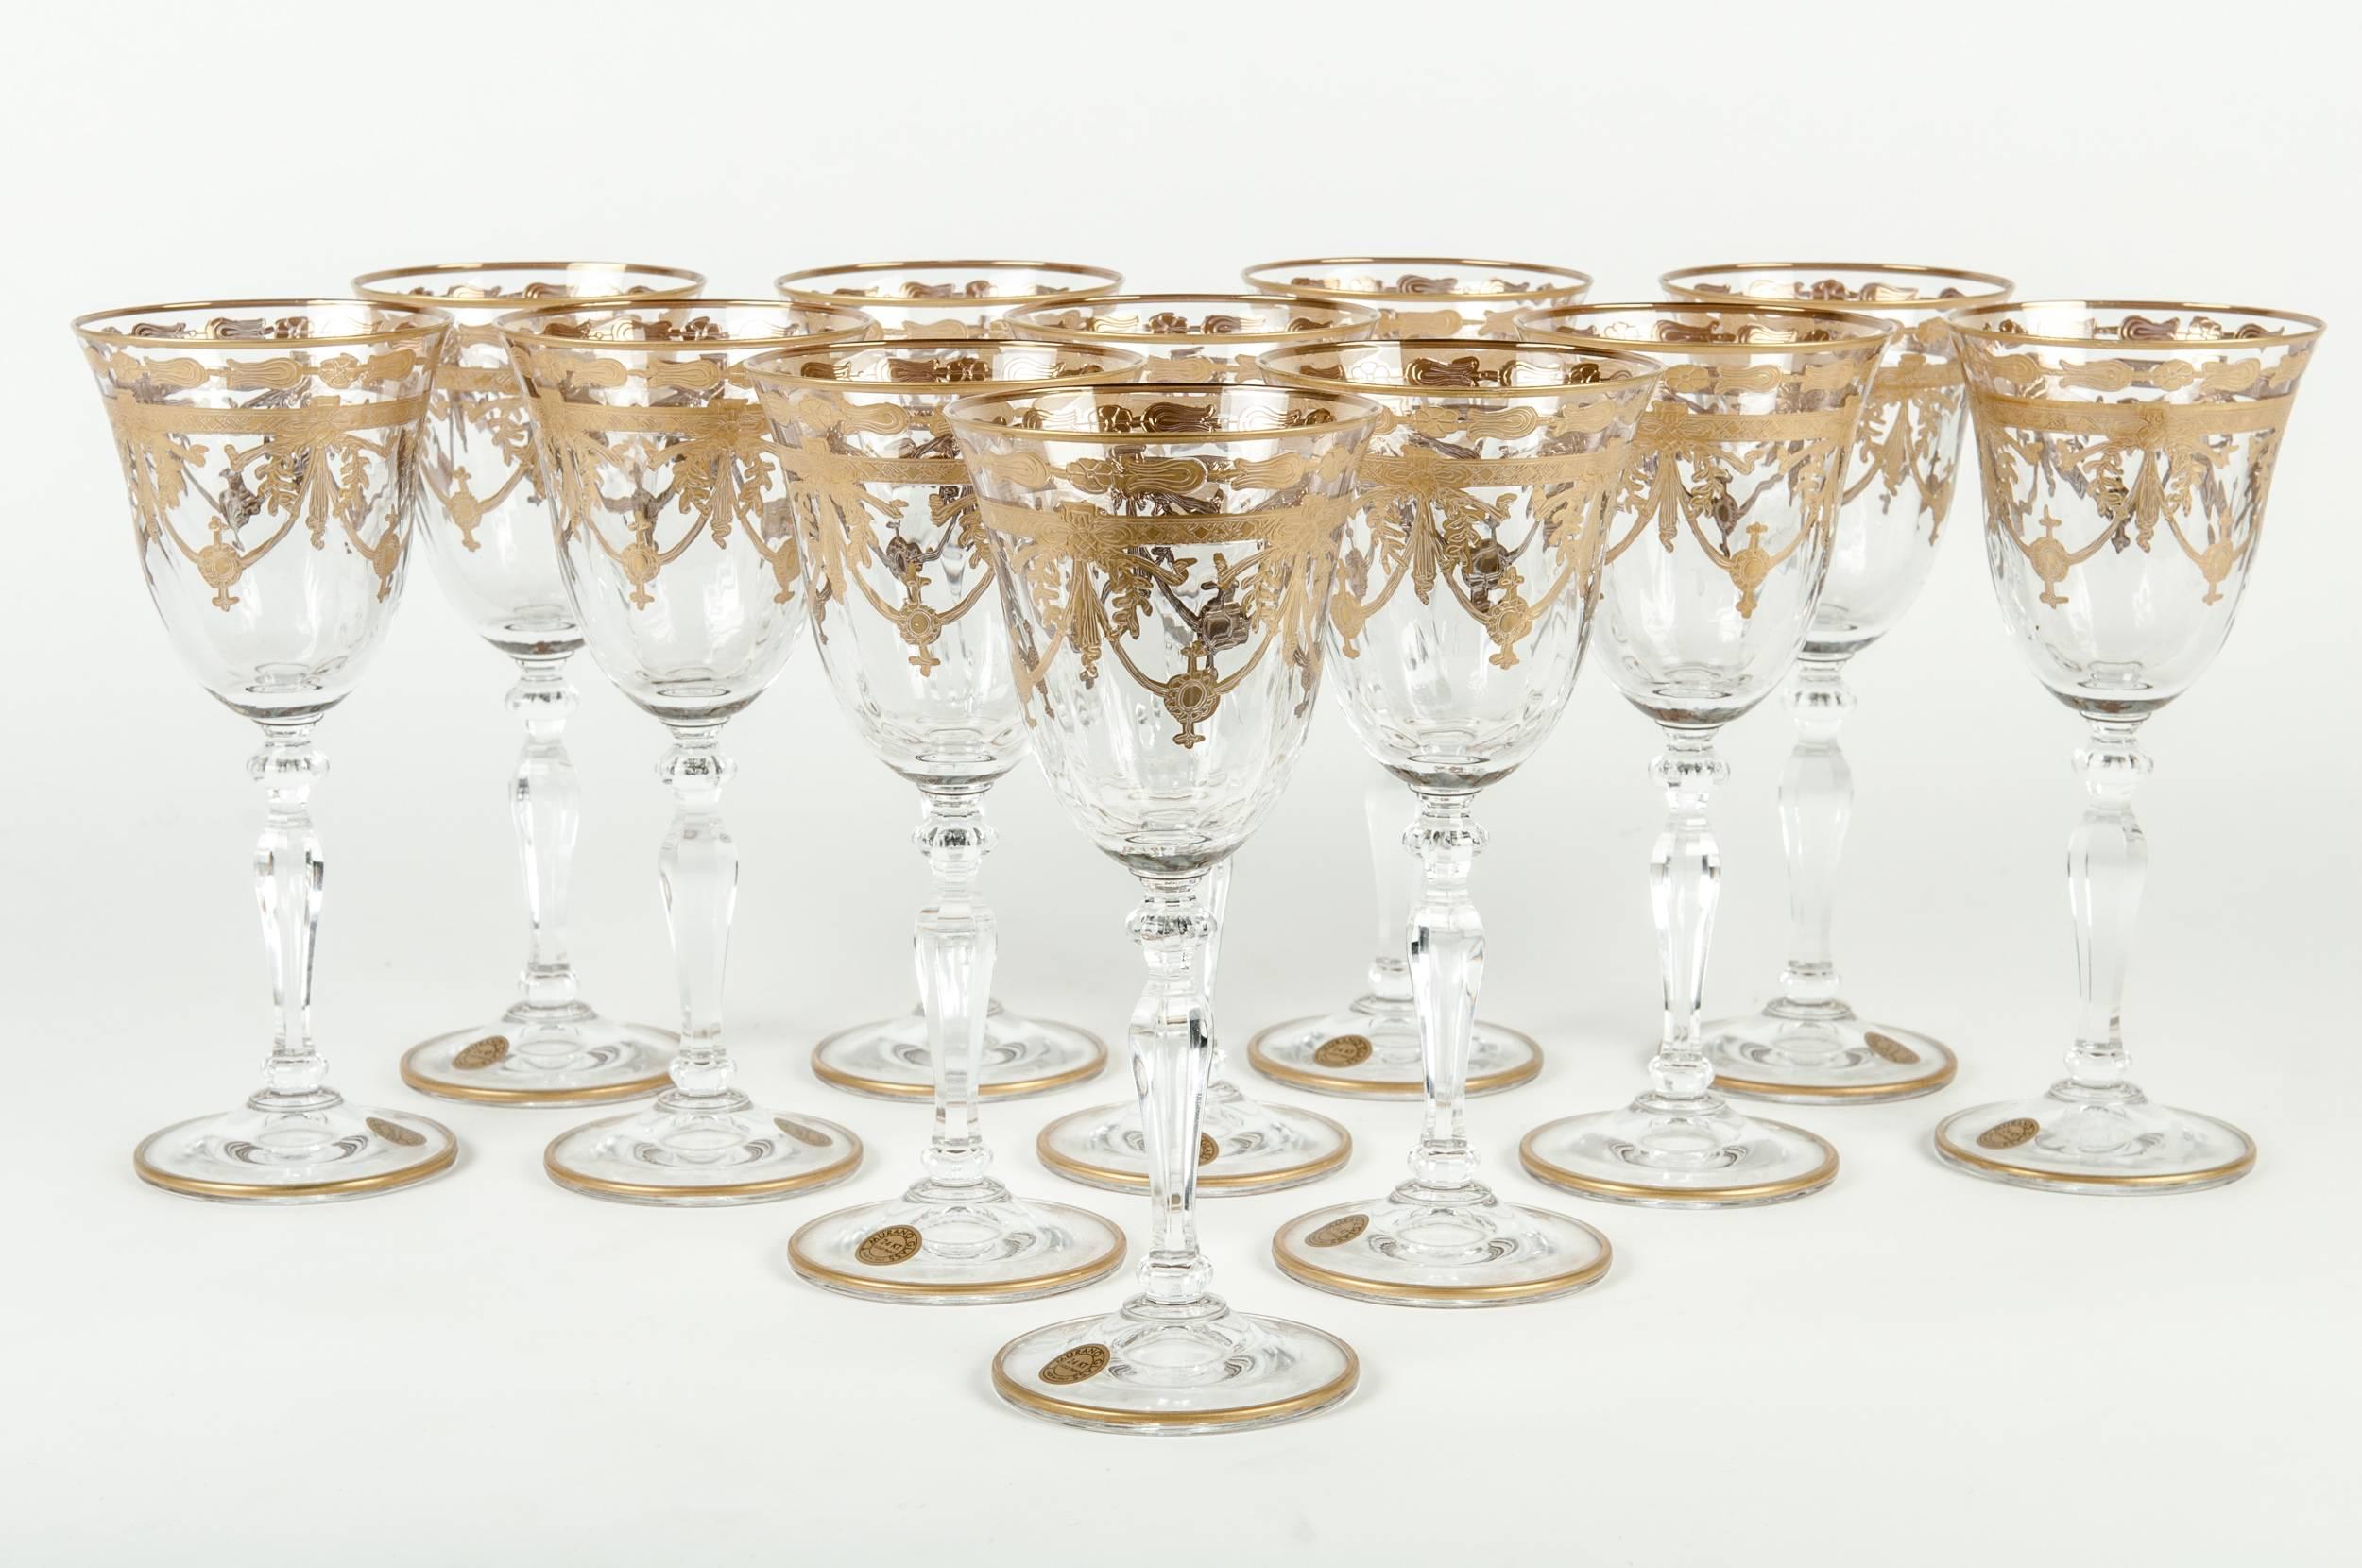 Set of 12 Murano champagne flute with 24-karat gold design. Each champagne flute measure 8.5 inches high x 2.5 inches diameter.